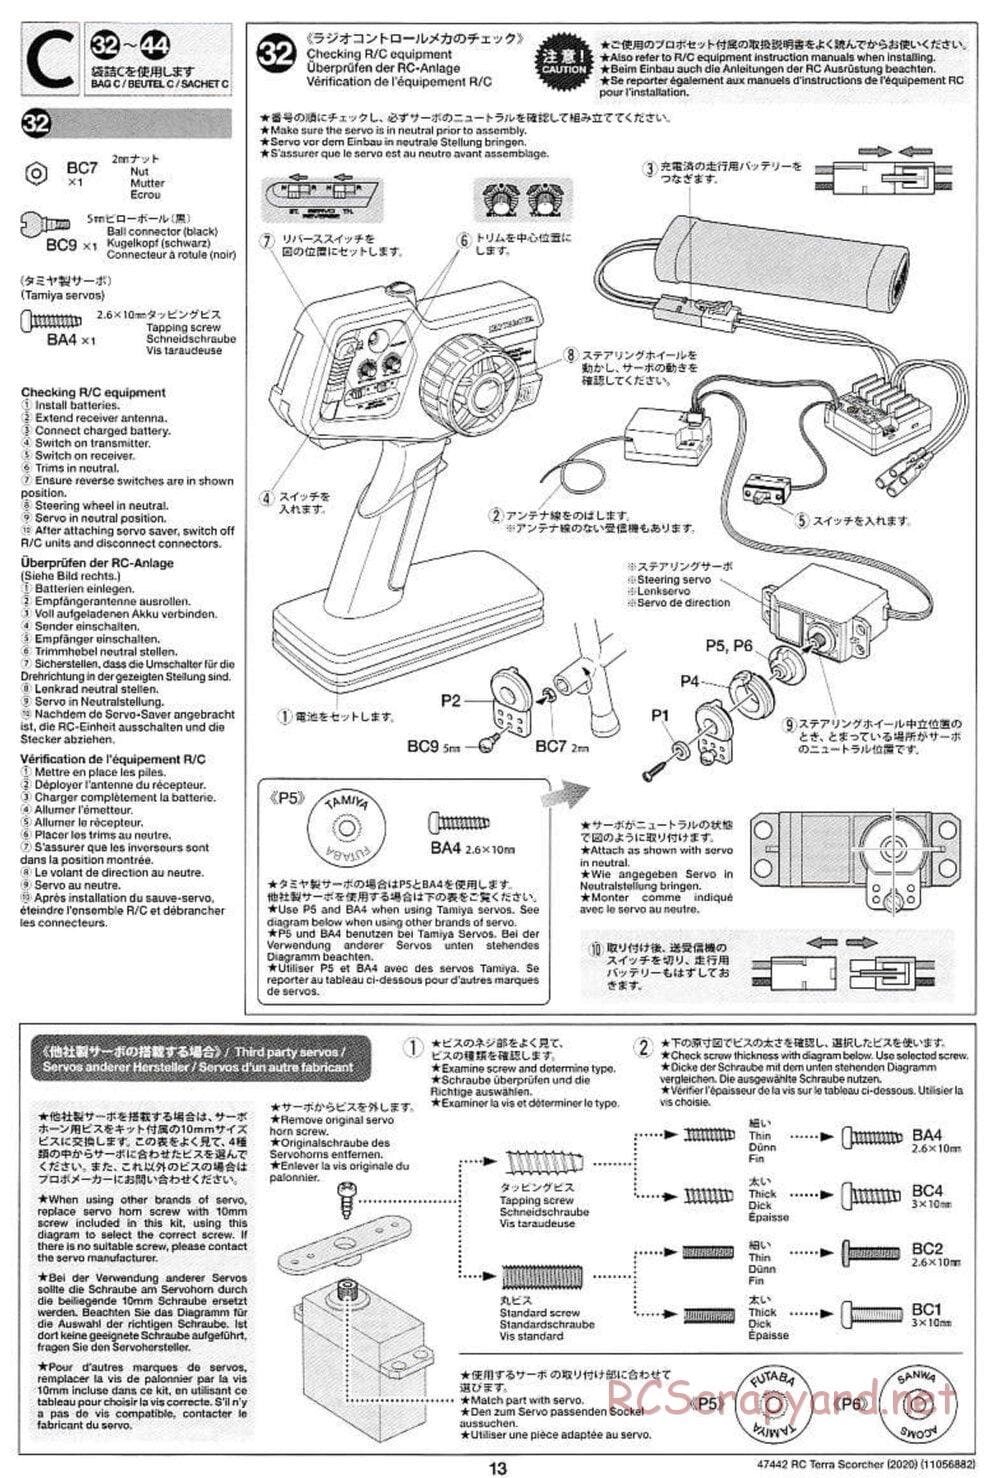 Tamiya - Terra Scorcher 2020 Chassis - Manual - Page 13